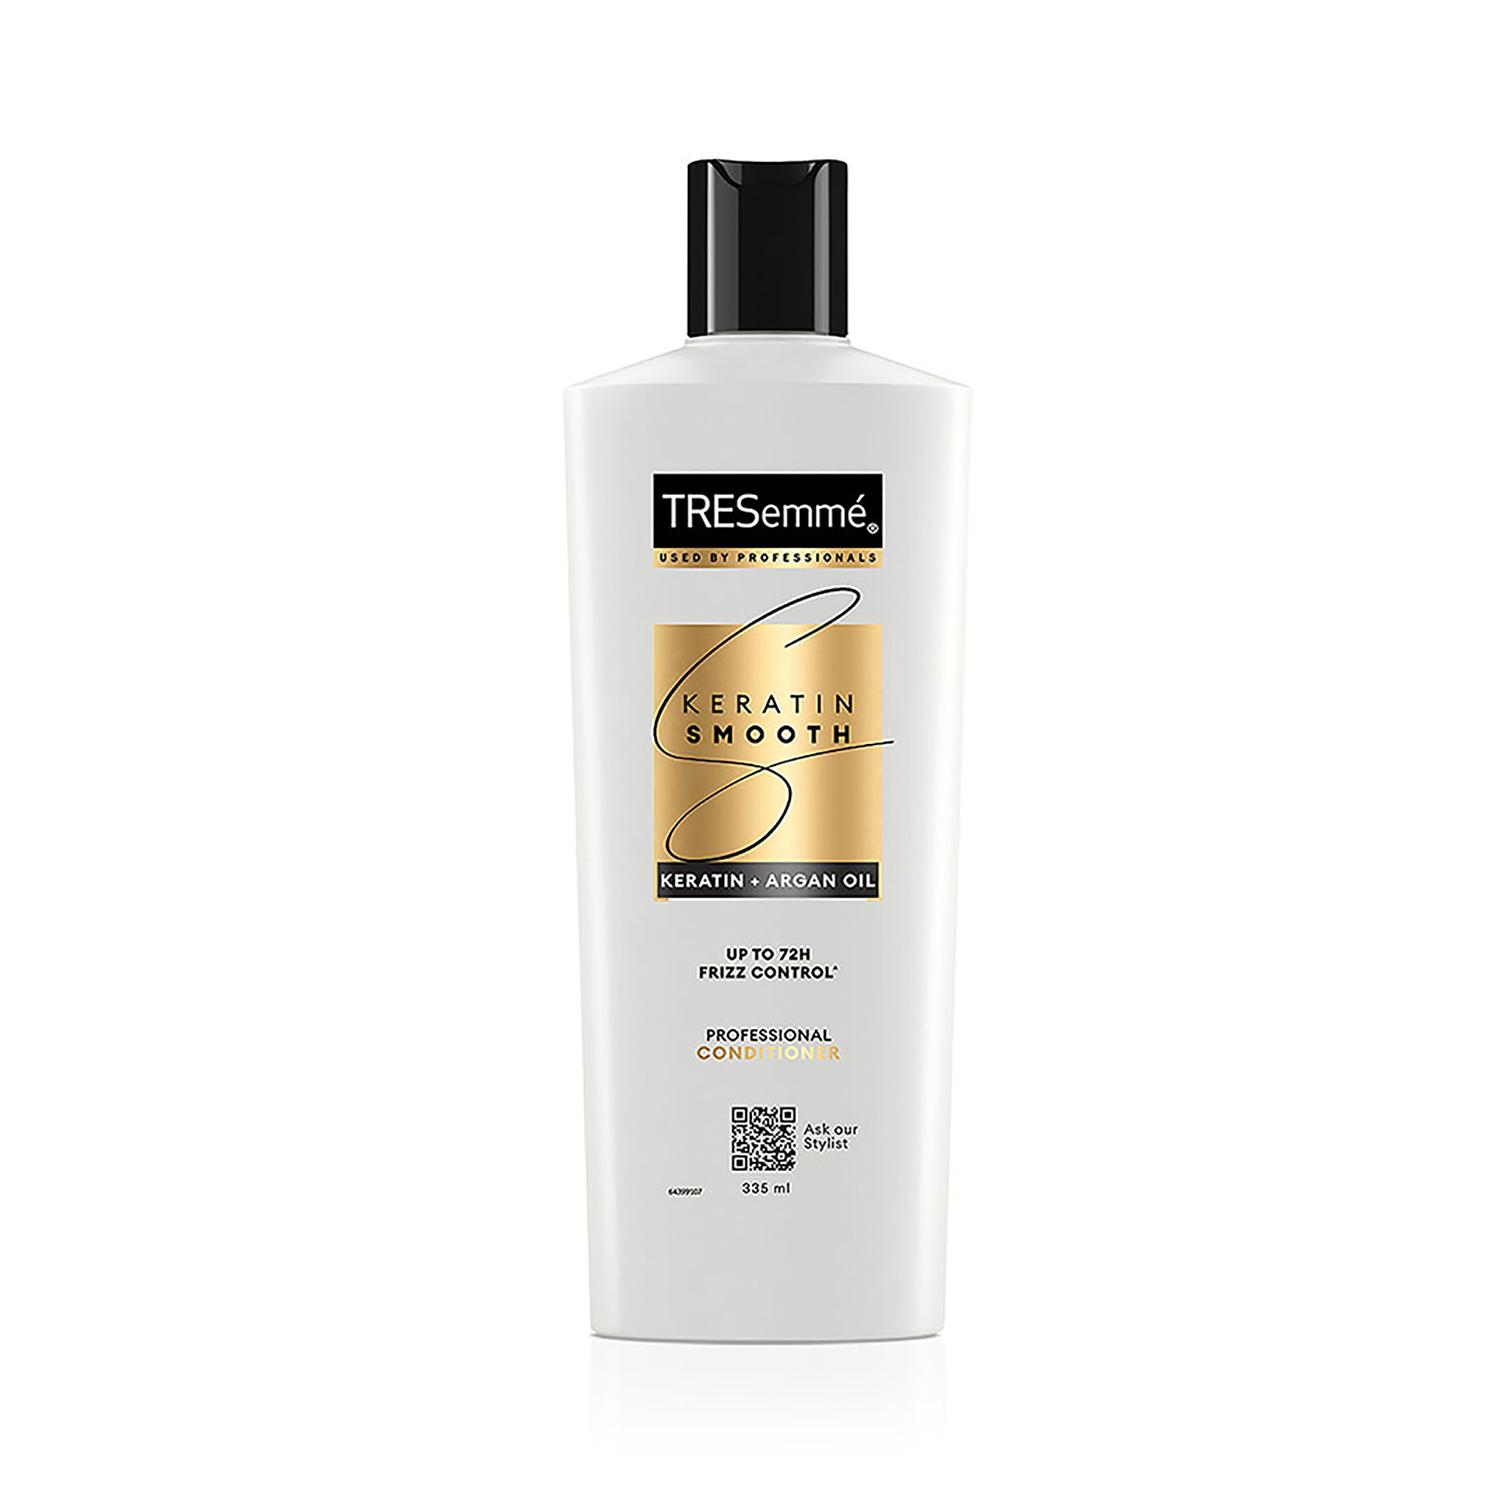 Tresemme | TRESemme Keratin Smooth Conditioner (335 ml)